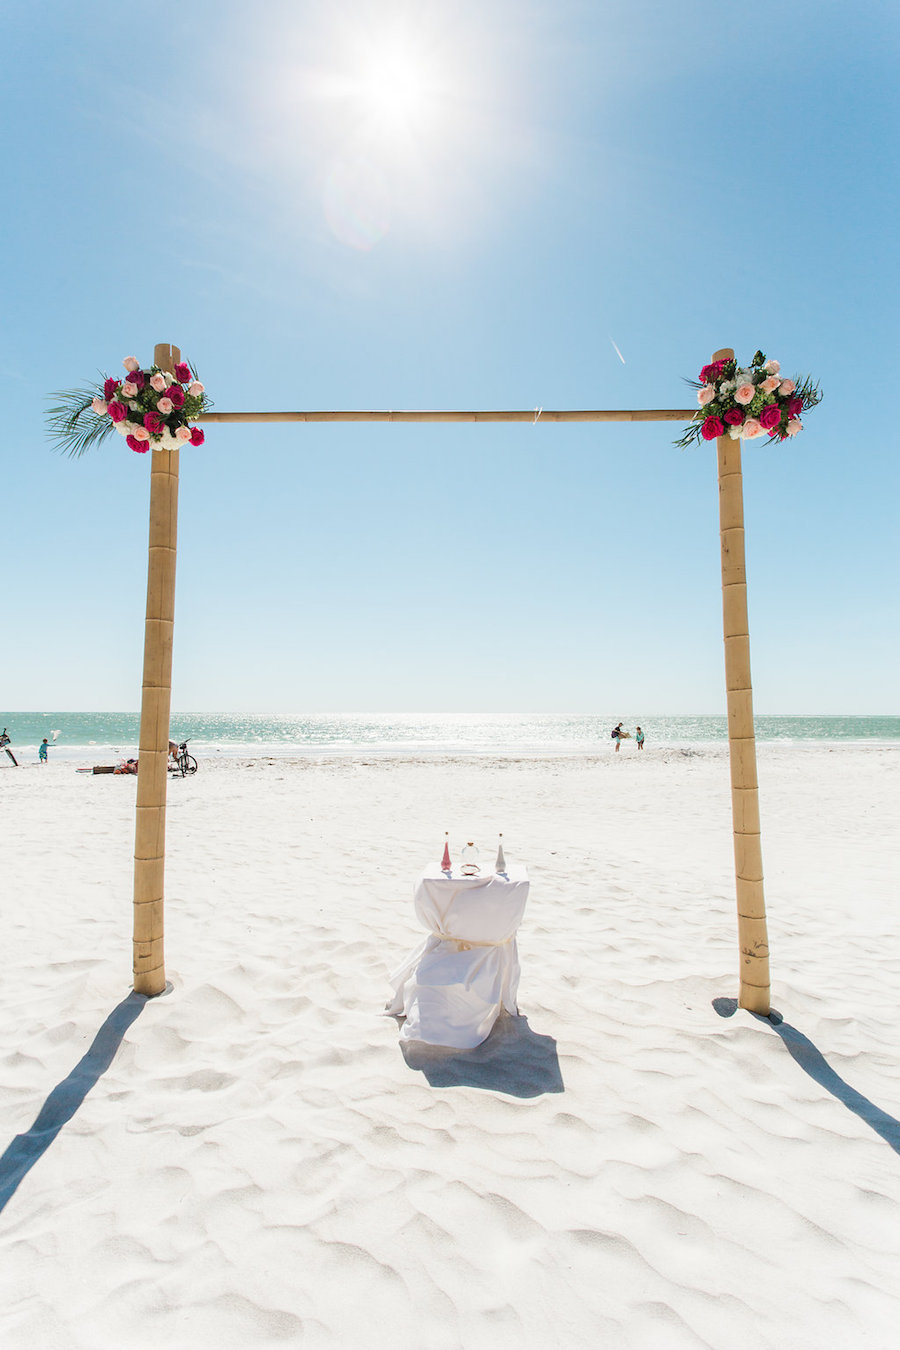 Siesta Key Beach Wedding Ceremony Decor with Tropical Fuchsia and Pink Rose Flowers on Bamboo Arch | Sarasota Wedding Planner Parties A La Carte